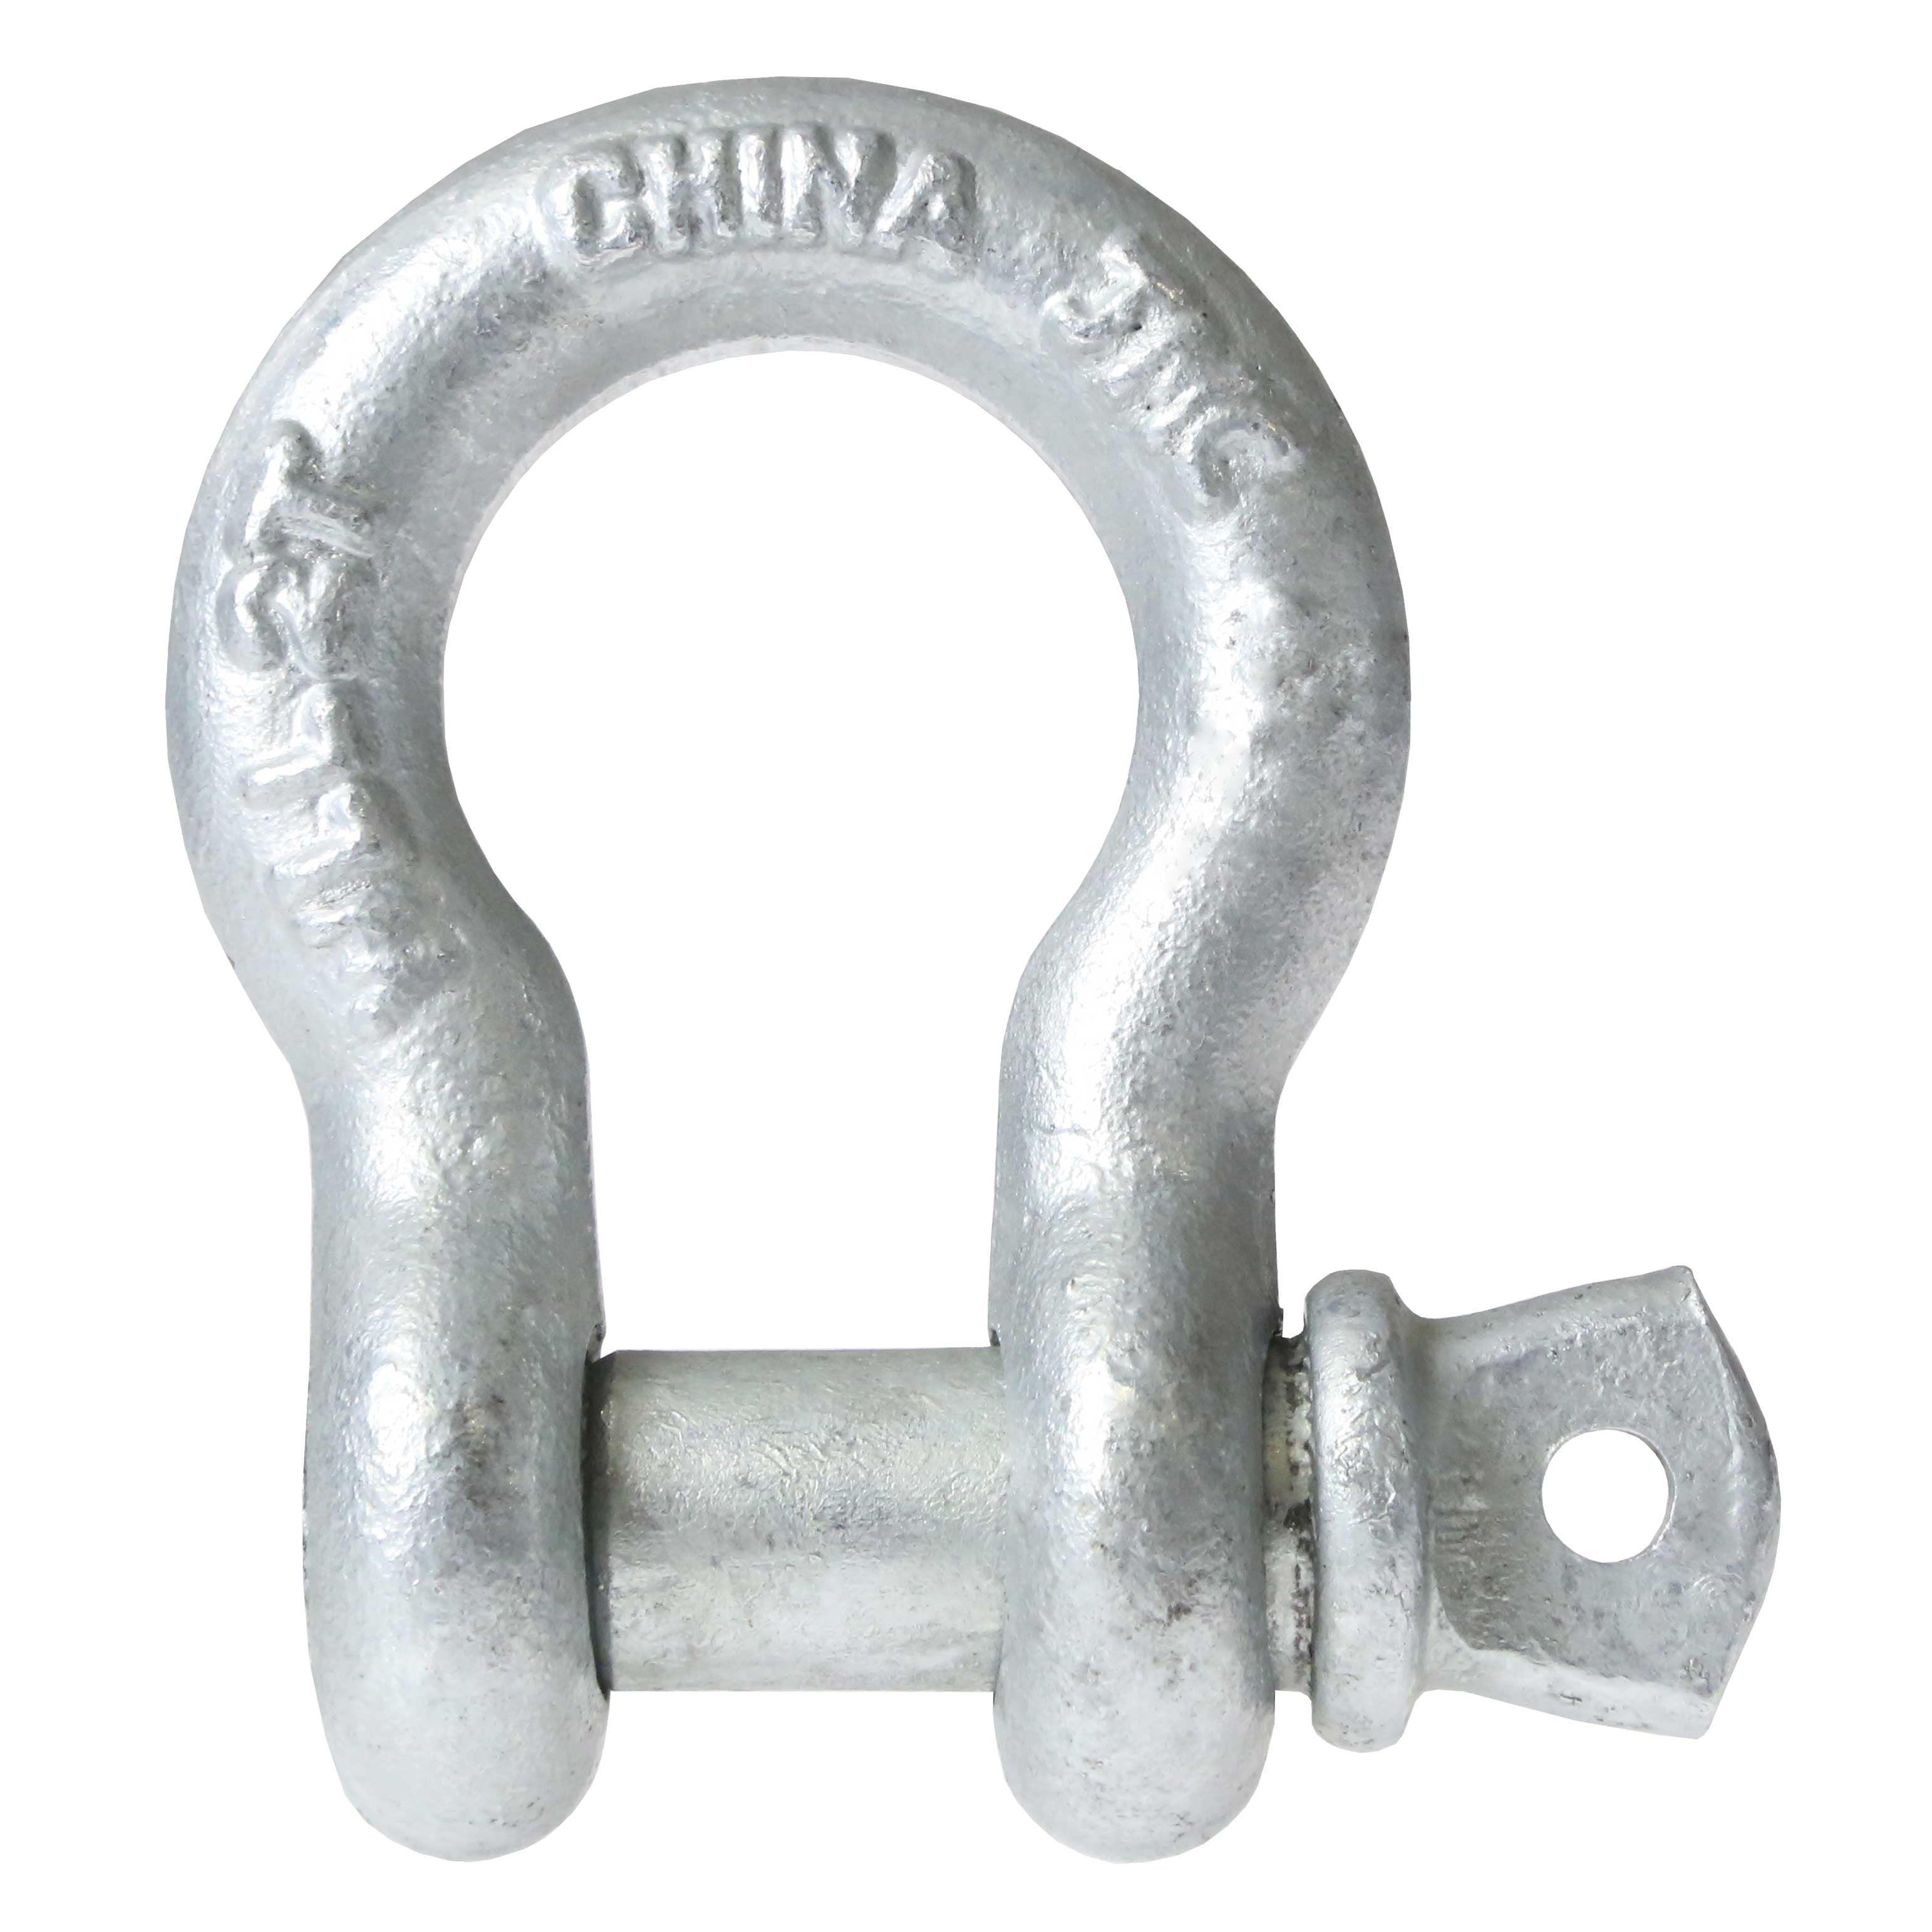 4 pack 5/16" Screw Pin Anchor Shackle Clevis D Ring Lifting 3/4 Ton Galvanized